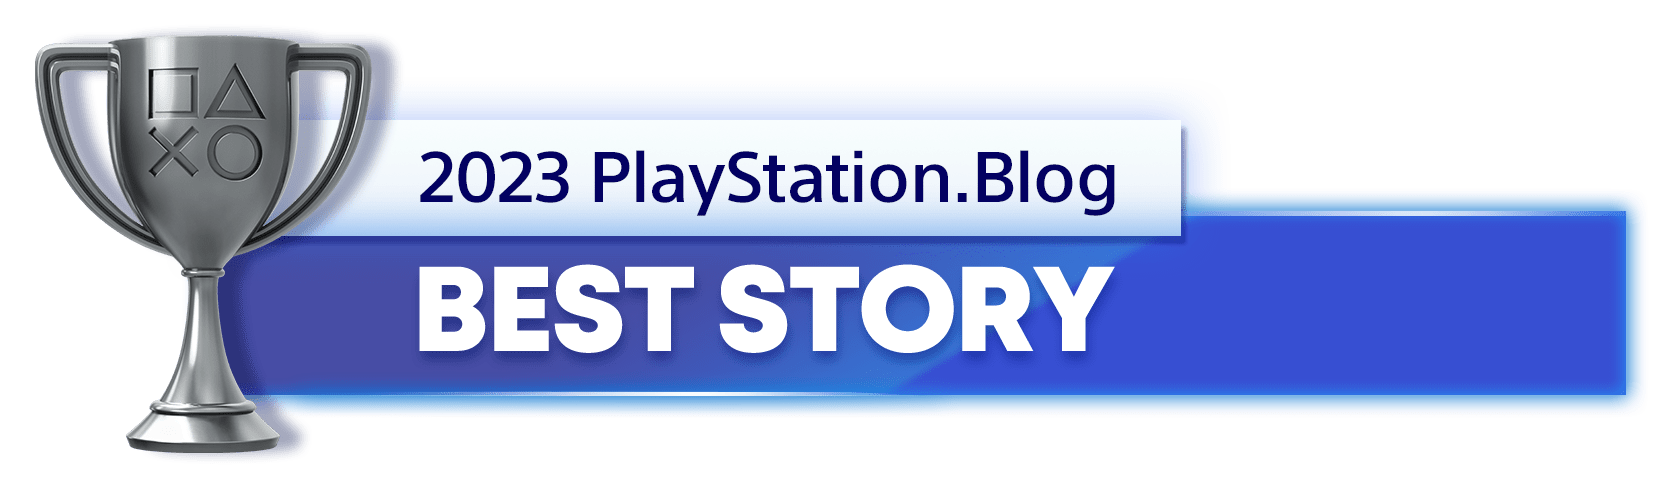 Silver Trophy for the 2023 PlayStation Blog Best Story Winner